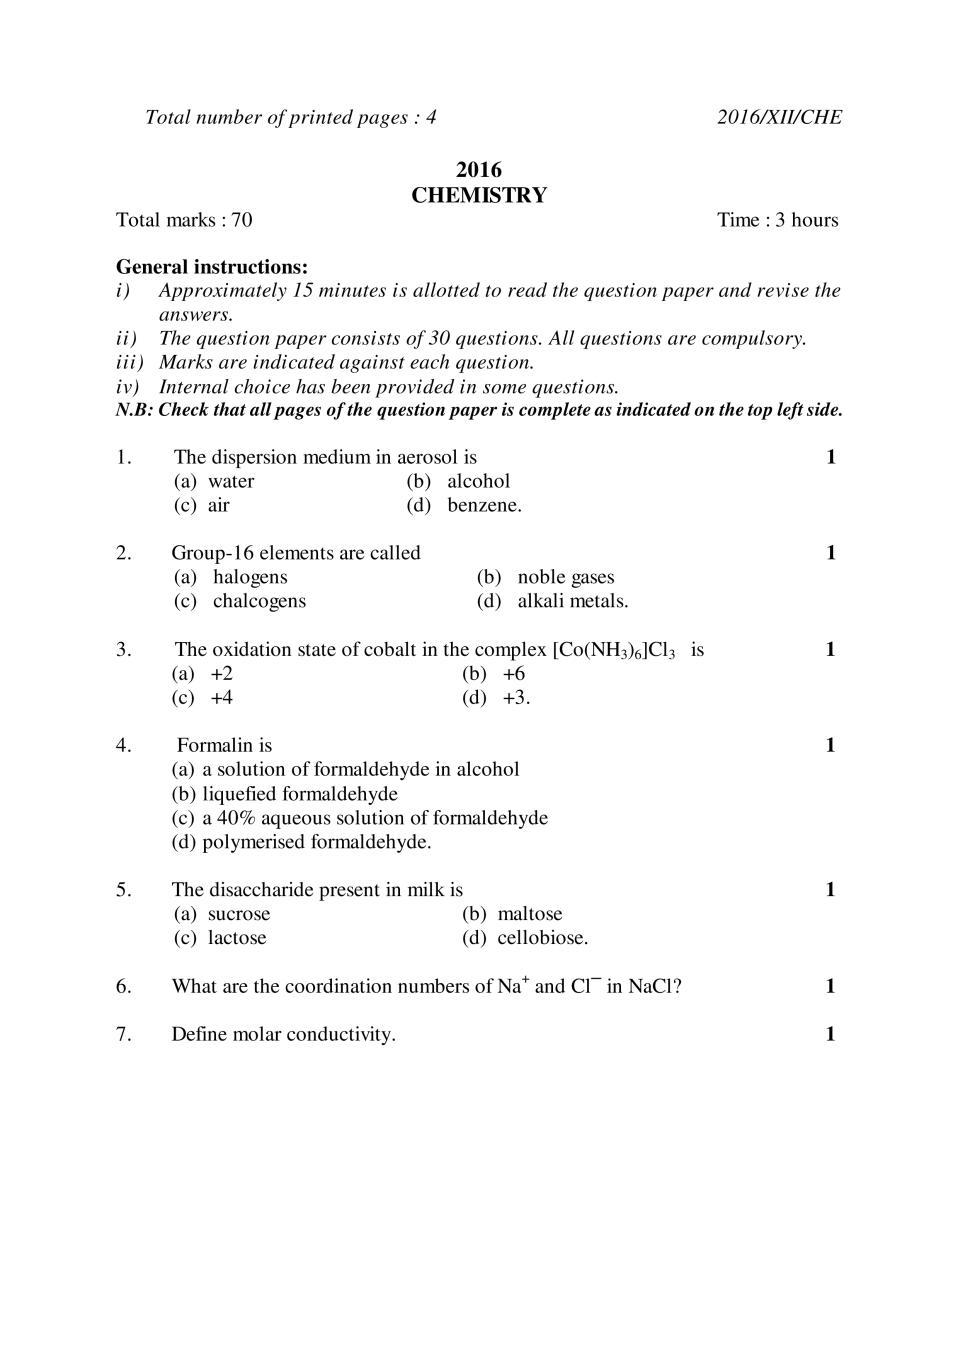 NBSE Class 12 Question Paper 2016 for Chemistry - Page 1